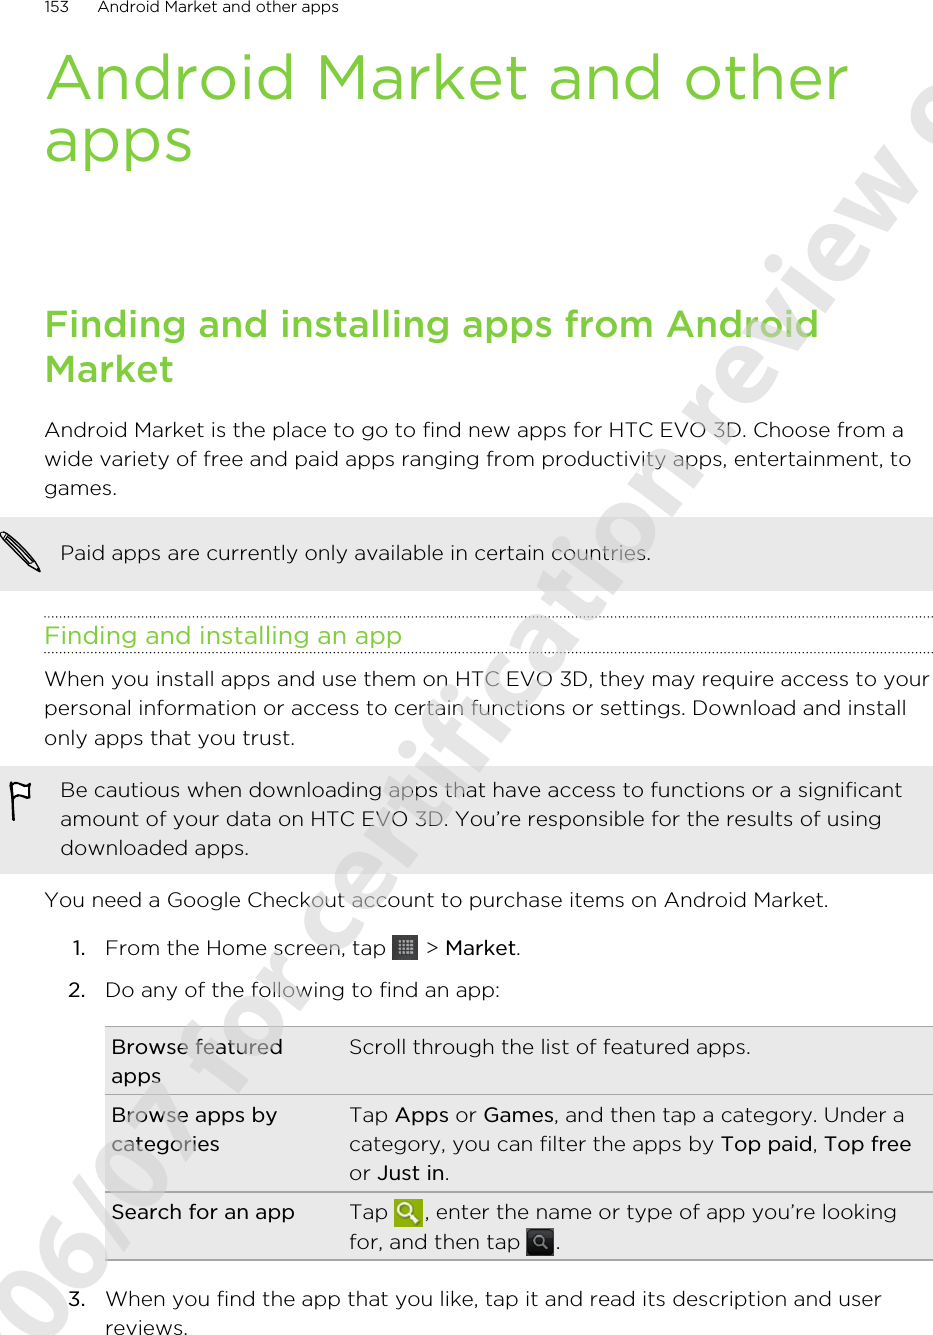 Android Market and otherappsFinding and installing apps from AndroidMarketAndroid Market is the place to go to find new apps for HTC EVO 3D. Choose from awide variety of free and paid apps ranging from productivity apps, entertainment, togames.Paid apps are currently only available in certain countries.Finding and installing an appWhen you install apps and use them on HTC EVO 3D, they may require access to yourpersonal information or access to certain functions or settings. Download and installonly apps that you trust.Be cautious when downloading apps that have access to functions or a significantamount of your data on HTC EVO 3D. You’re responsible for the results of usingdownloaded apps.You need a Google Checkout account to purchase items on Android Market.1. From the Home screen, tap   &gt; Market.2. Do any of the following to find an app:Browse featuredappsScroll through the list of featured apps.Browse apps bycategoriesTap Apps or Games, and then tap a category. Under acategory, you can filter the apps by Top paid, Top freeor Just in.Search for an app Tap  , enter the name or type of app you’re lookingfor, and then tap  .3. When you find the app that you like, tap it and read its description and userreviews.153 Android Market and other apps2011/06/07 for certification review only